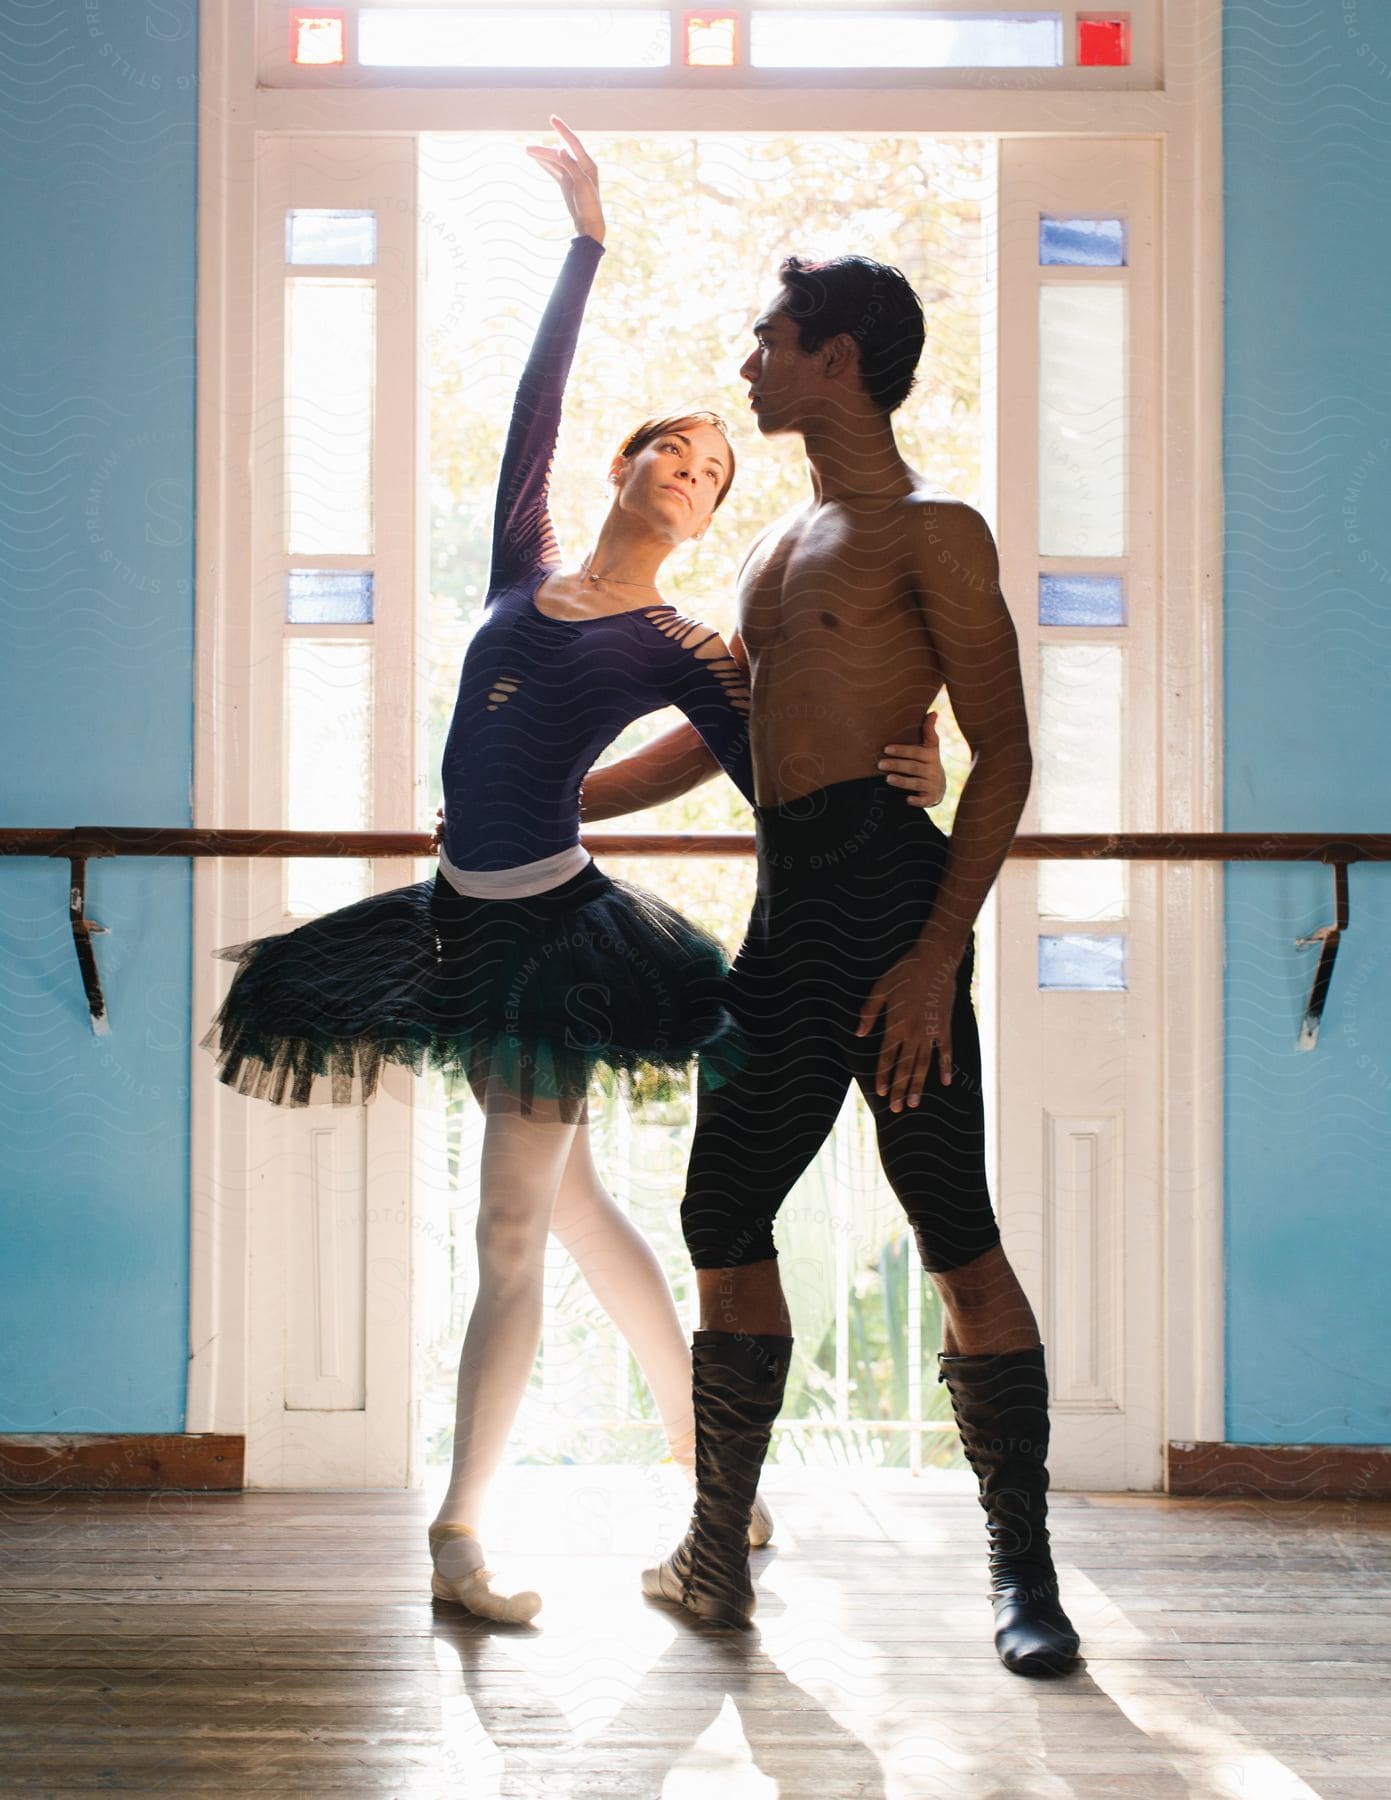 Two ballet dancers perform a dance in front of an open door with stained glass panels